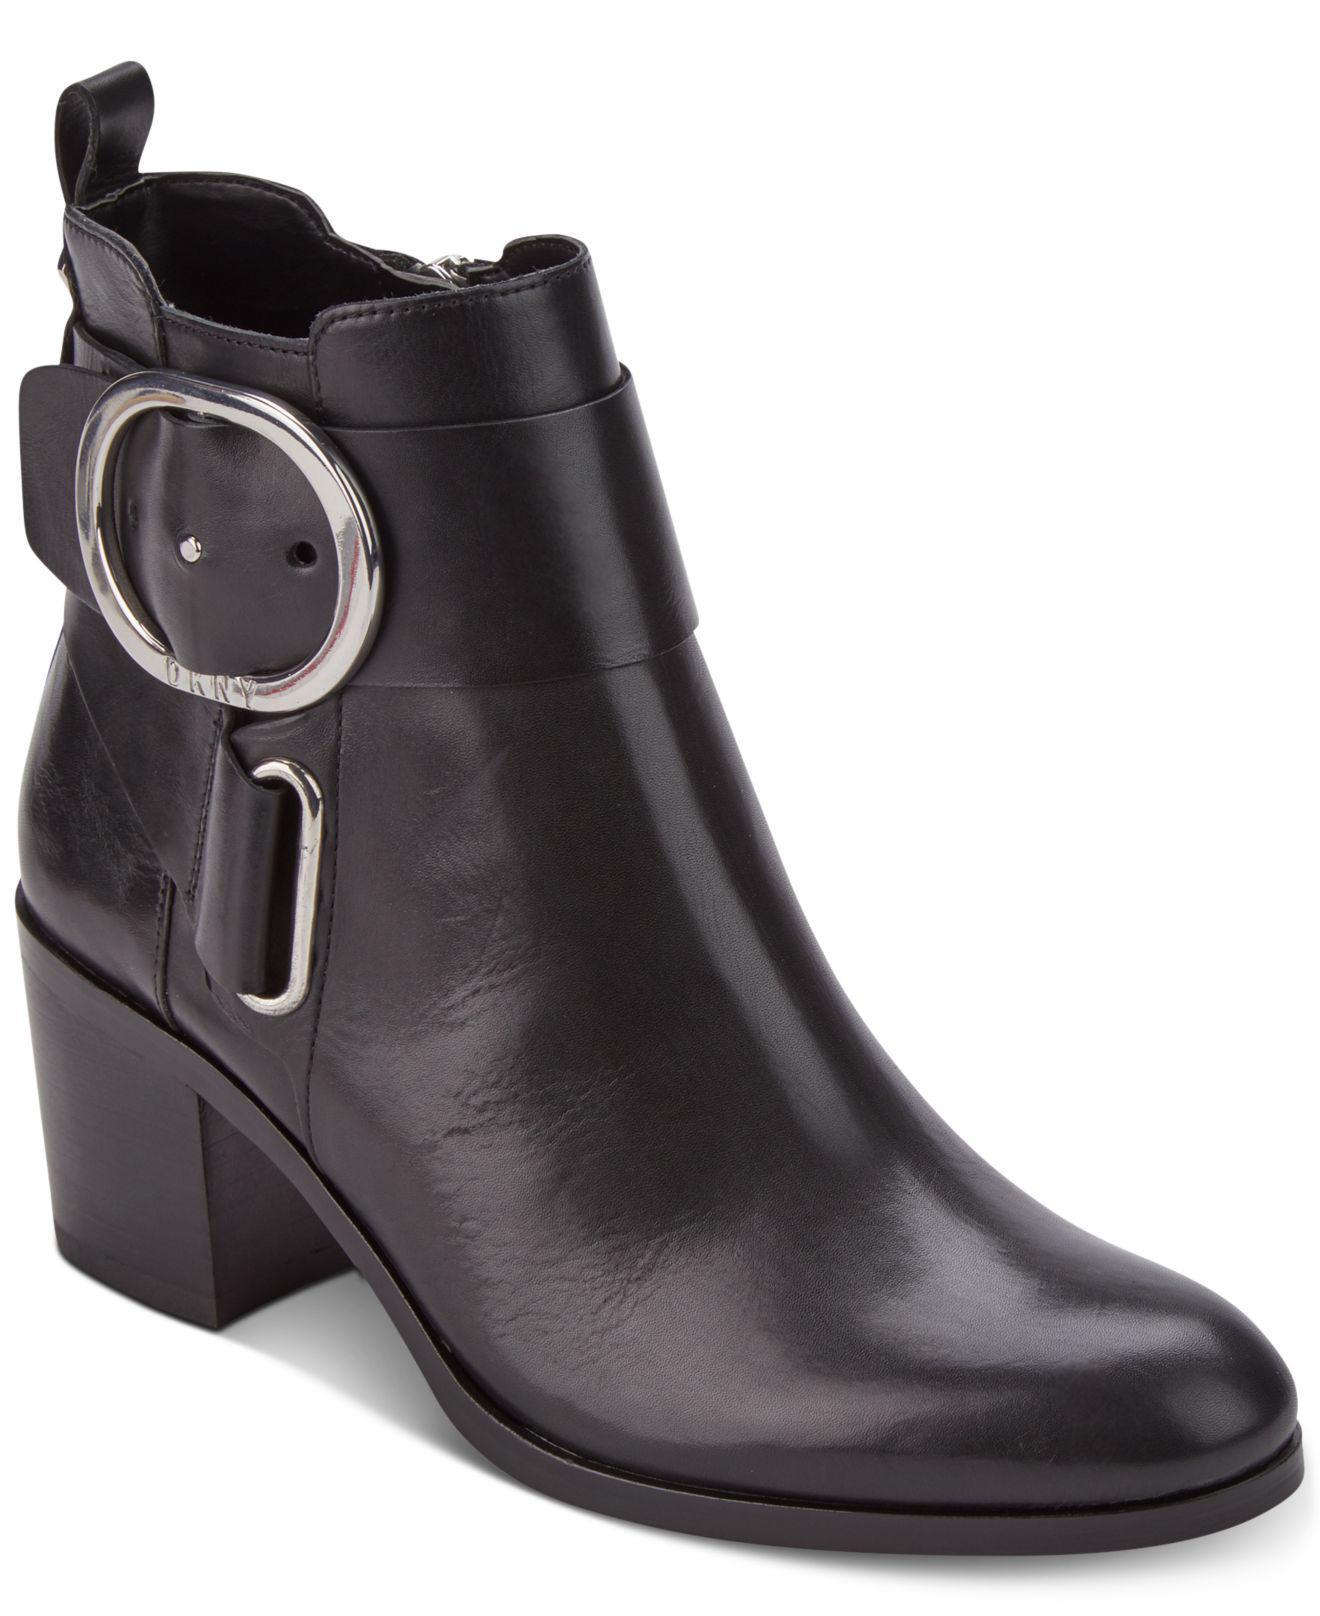 DKNY Womens Telo Ankle Boot W Leather Round Toe Ankle Fashion, Black ...